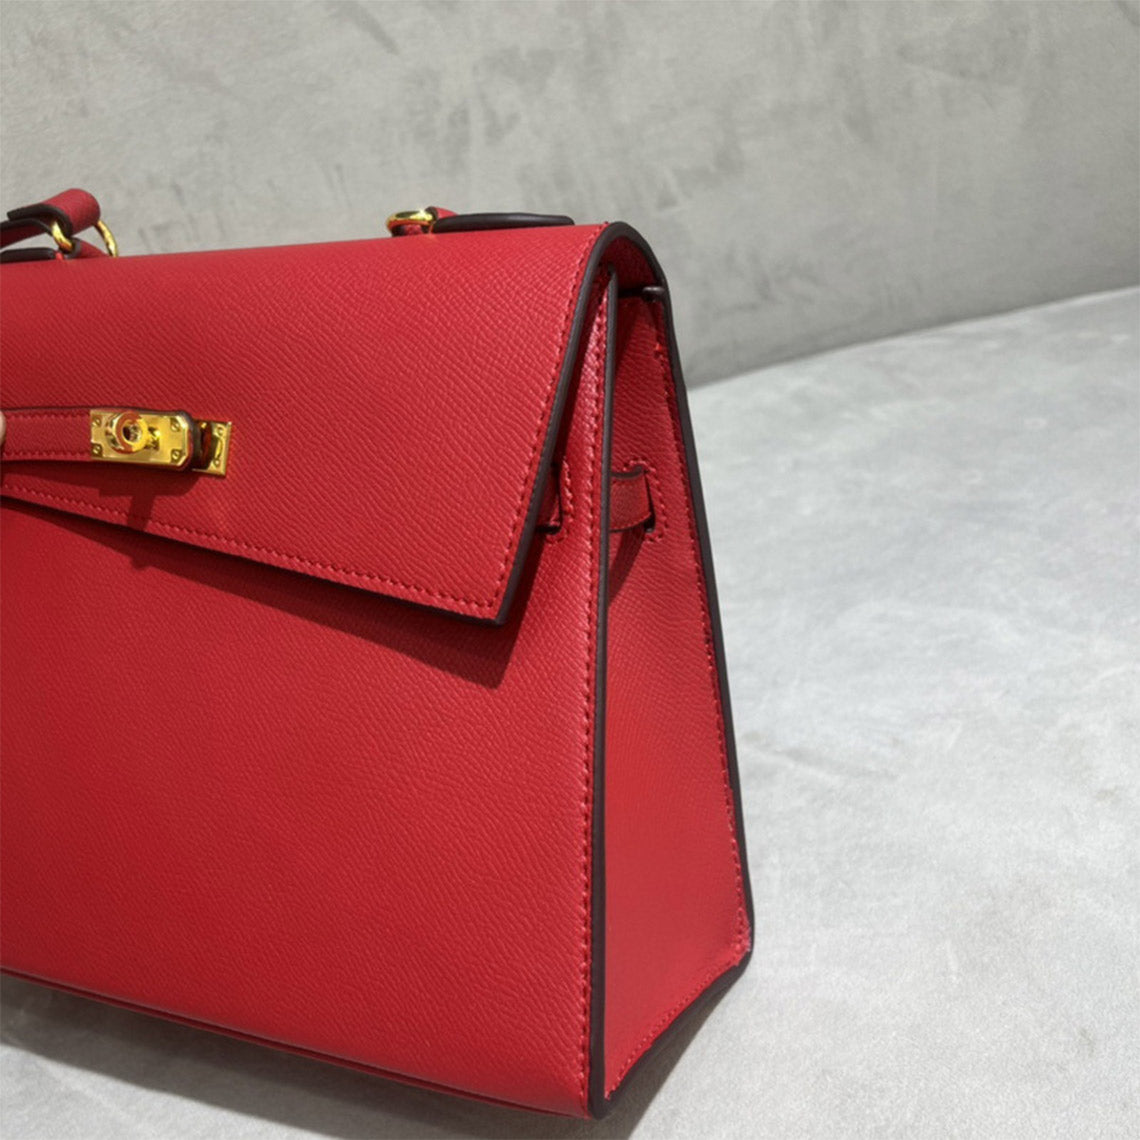 Red Leather Kelly Bag Dupe